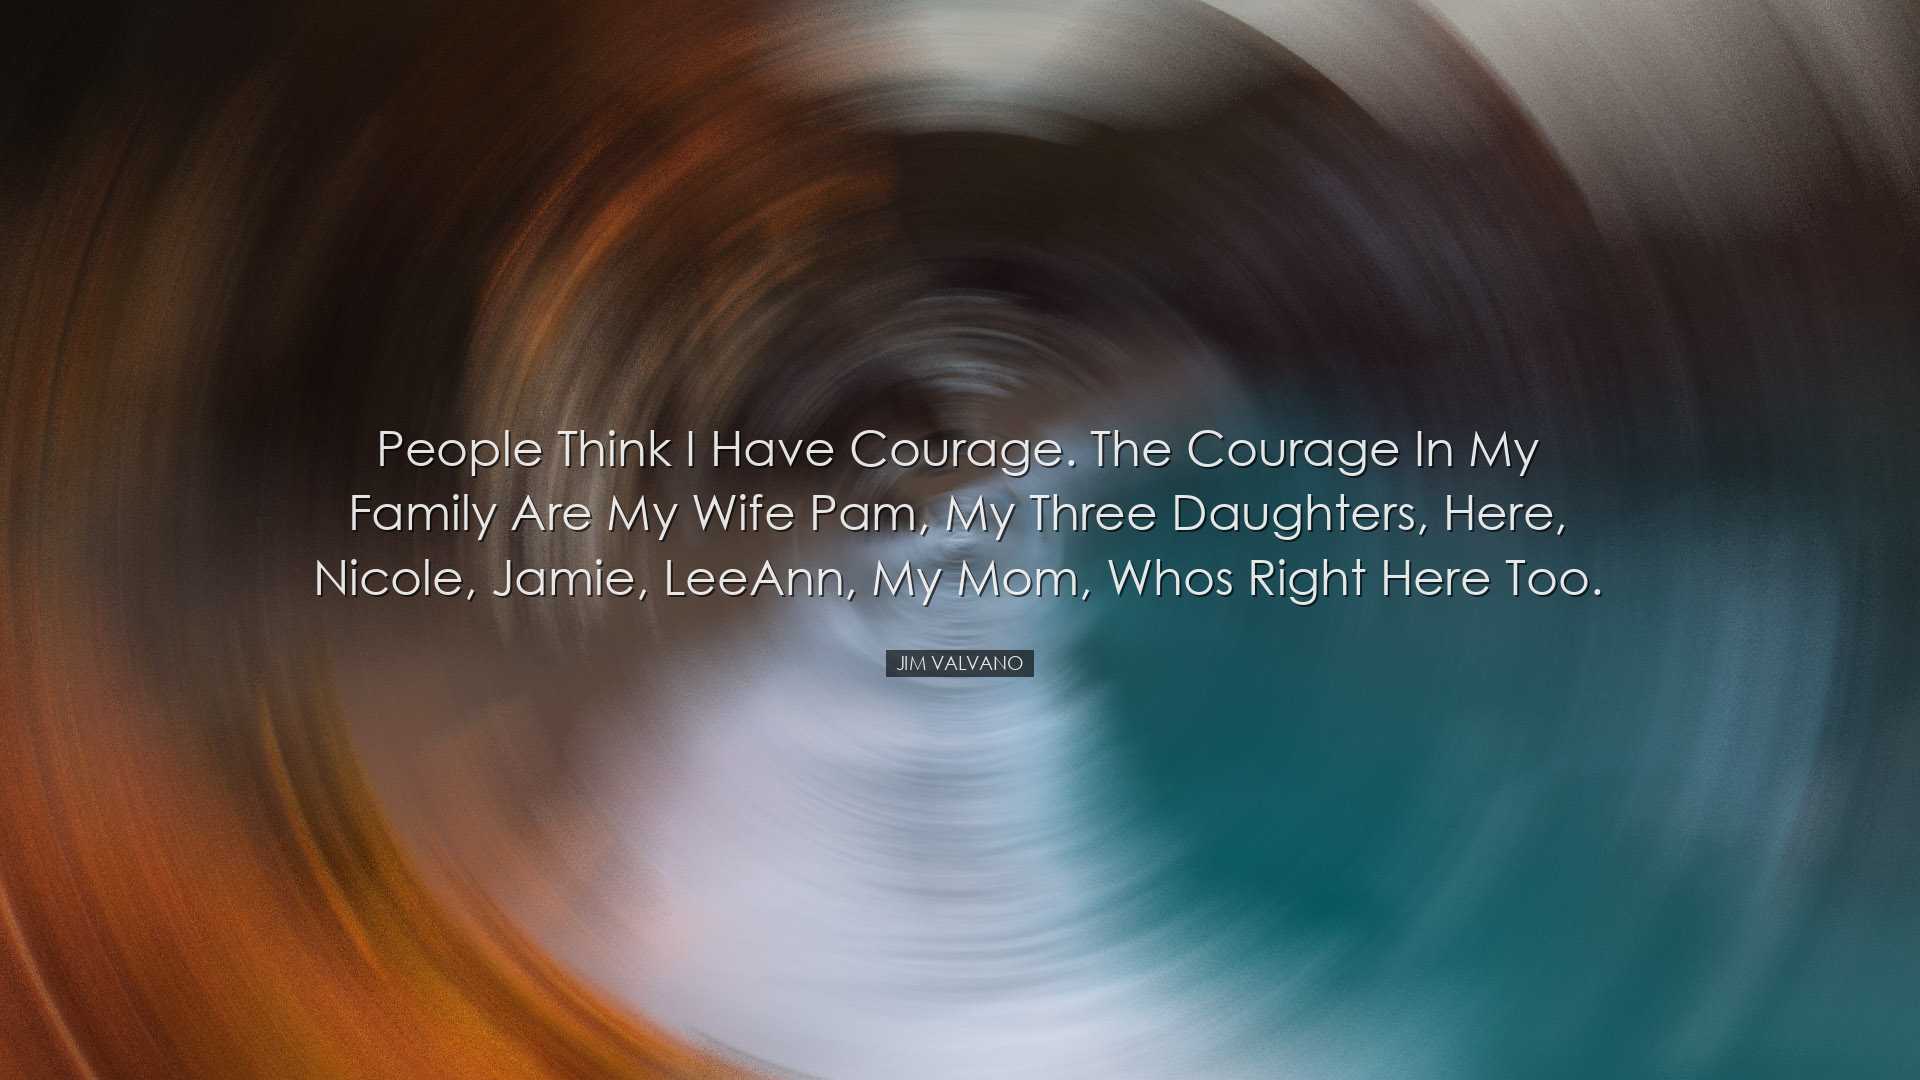 People think I have courage. The courage in my family are my wife